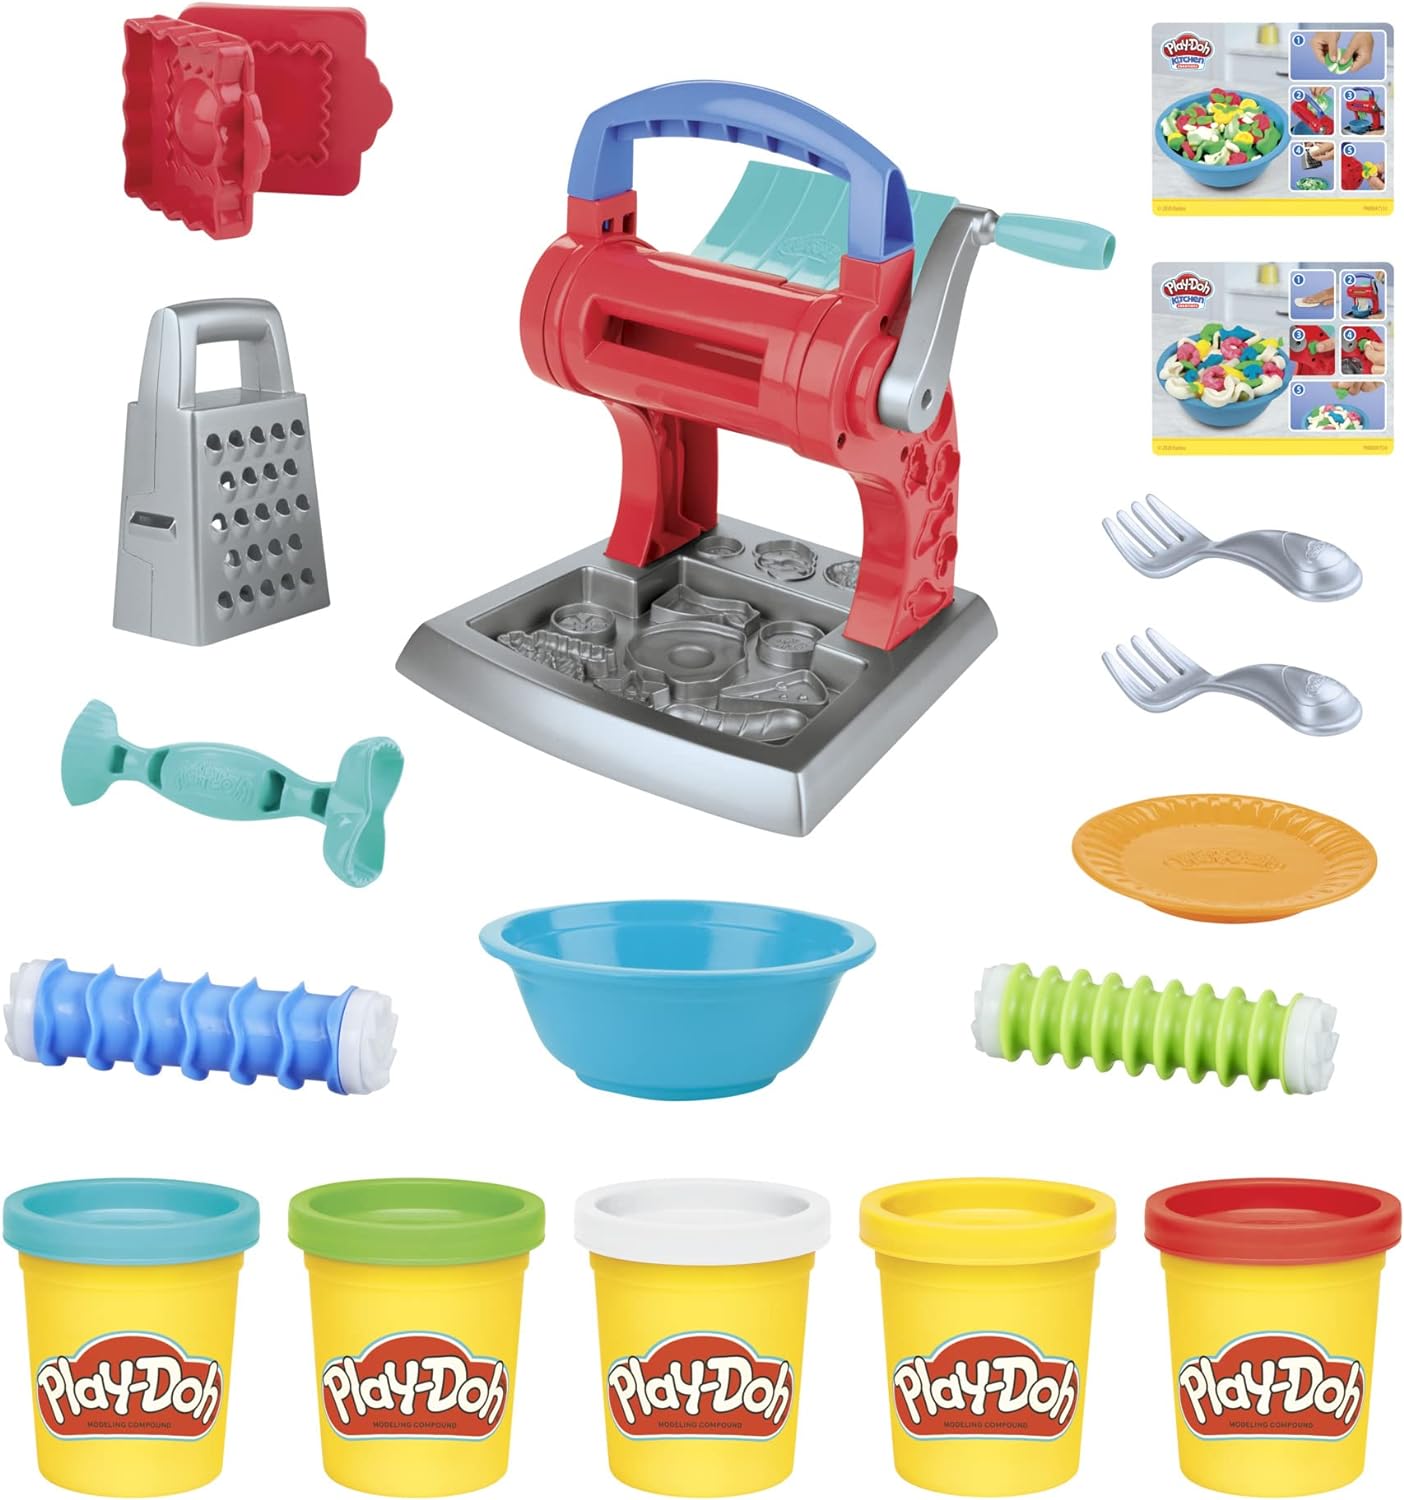 Play-doh Kitchen Noodle Playset